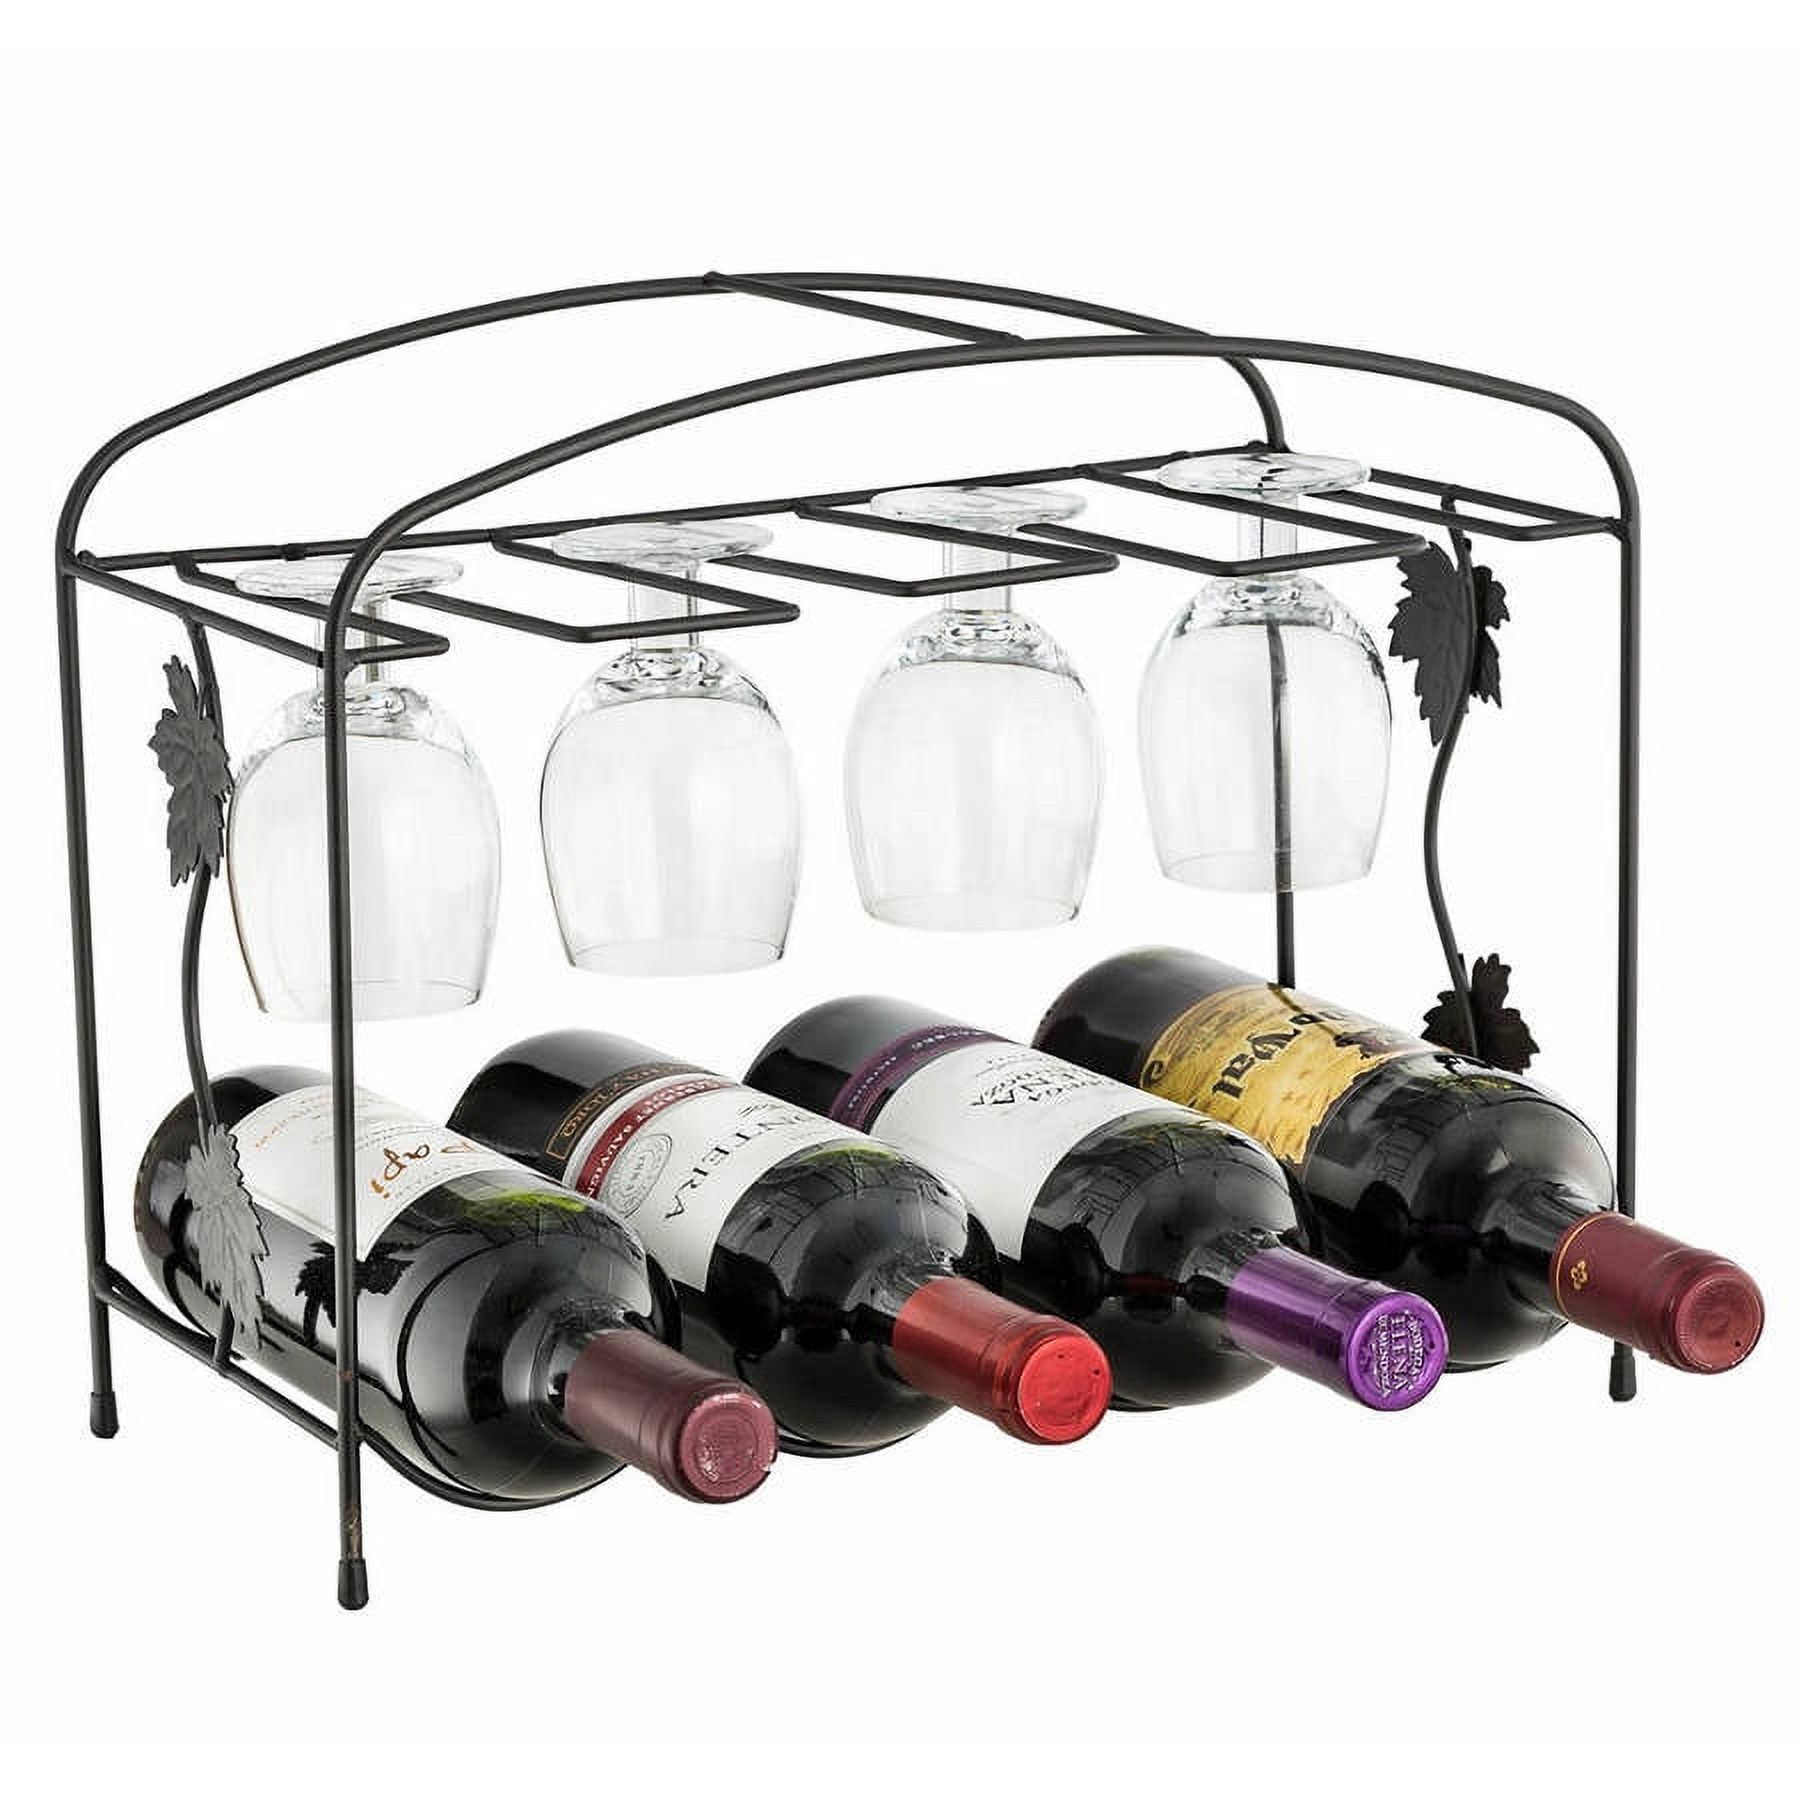 Sorbus Wine and Glass Tabletop Display Rack, Bronze Finish - image 1 of 1